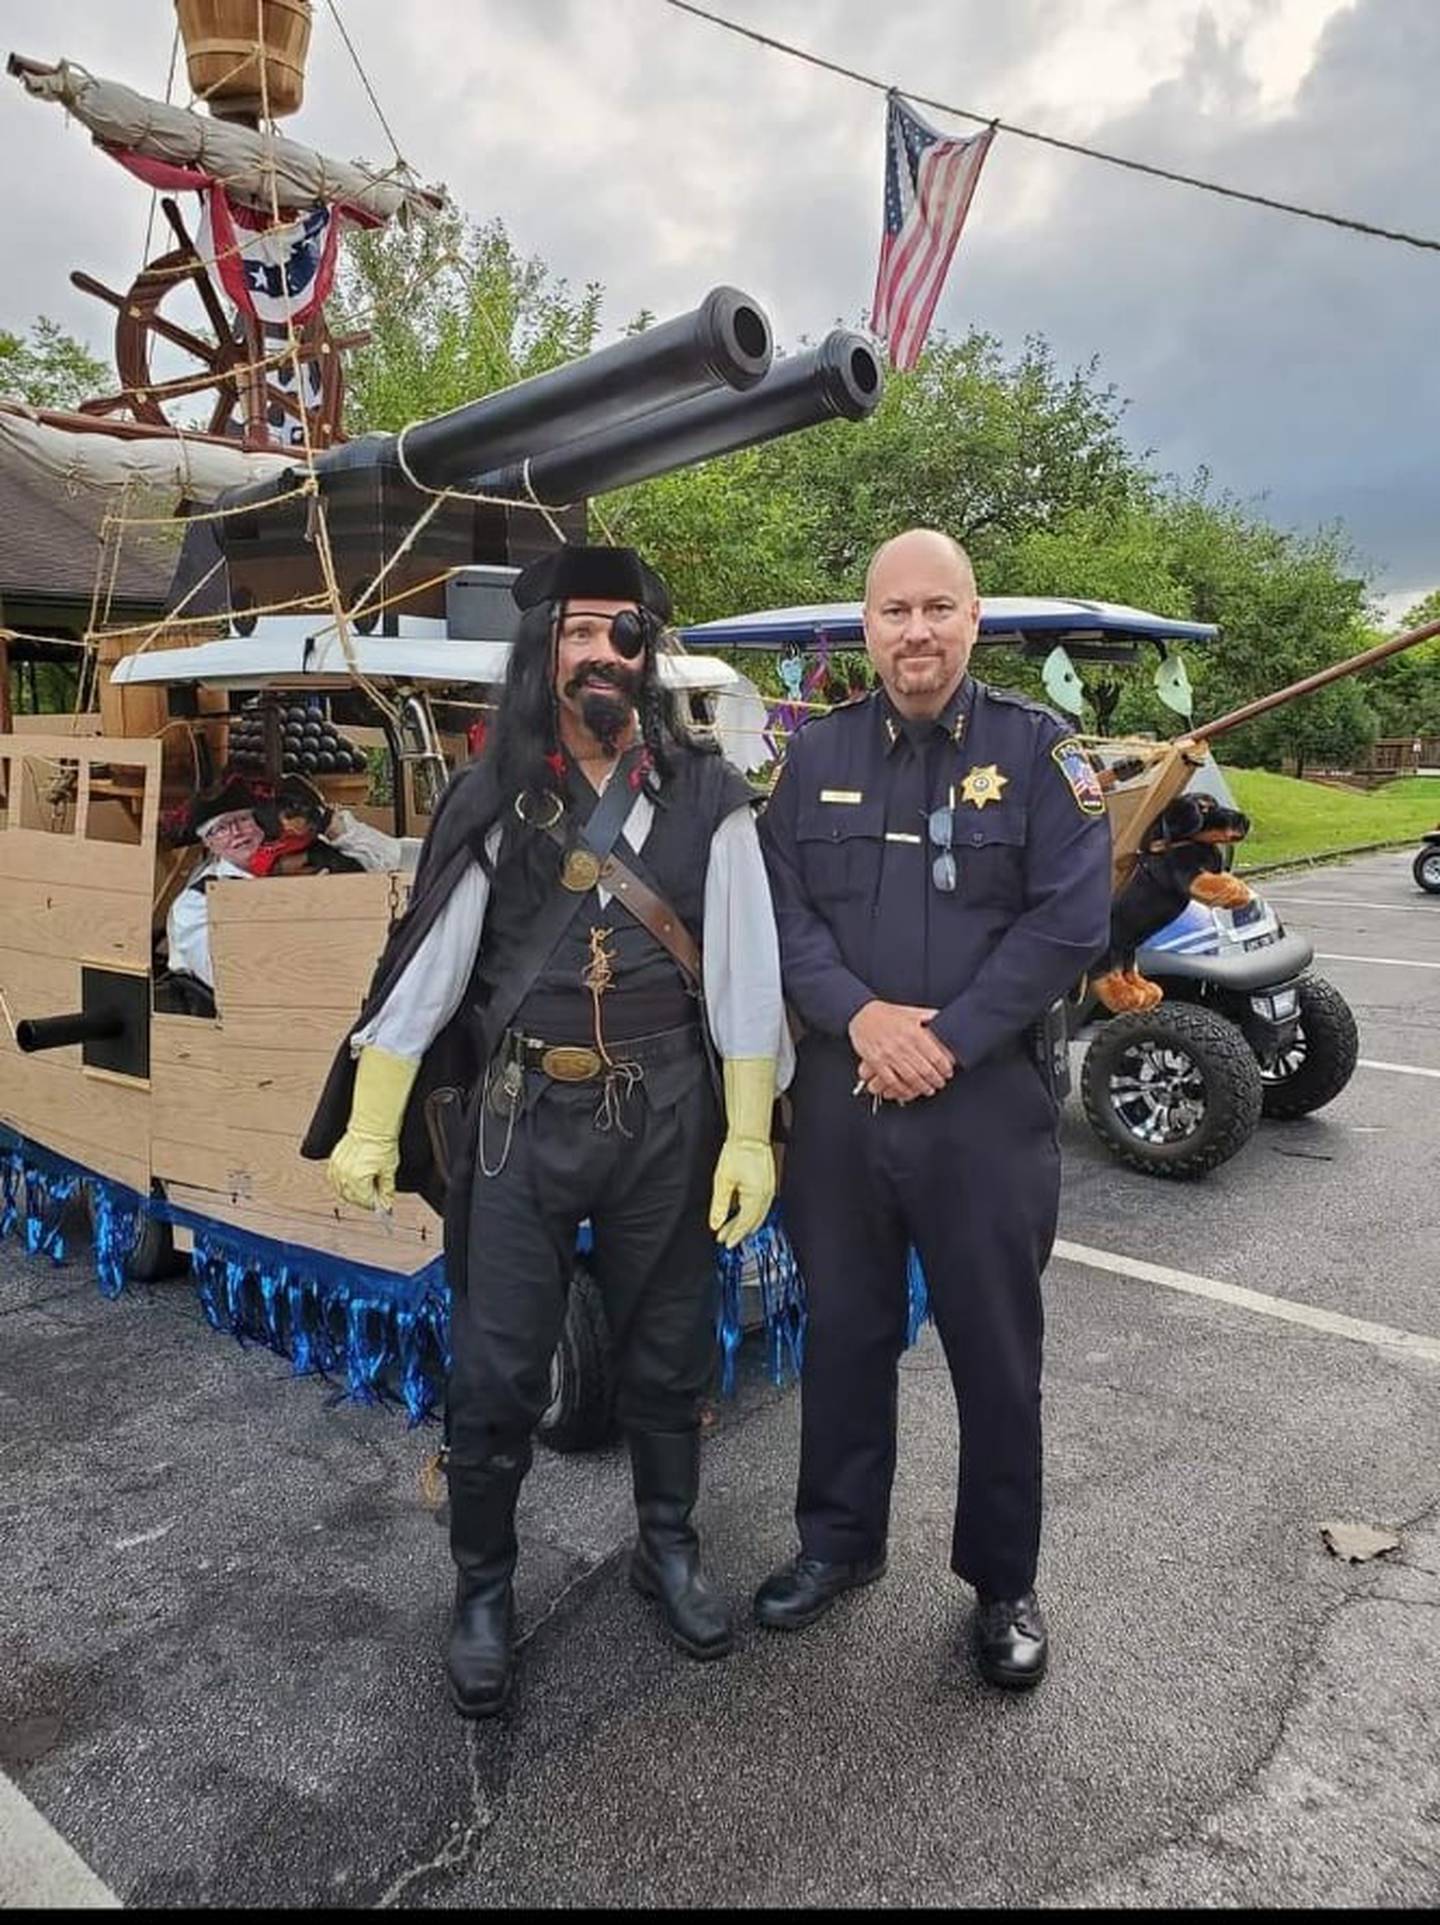 Braidwood resident Greg Machak said he built a 24-foot long, 12-foot high, fully drivable Navy destroyer – a USS Hollister – on a golf cart. Machak is pictured on the left and Todd Lyons, Braidwood chief of police, is on the right.